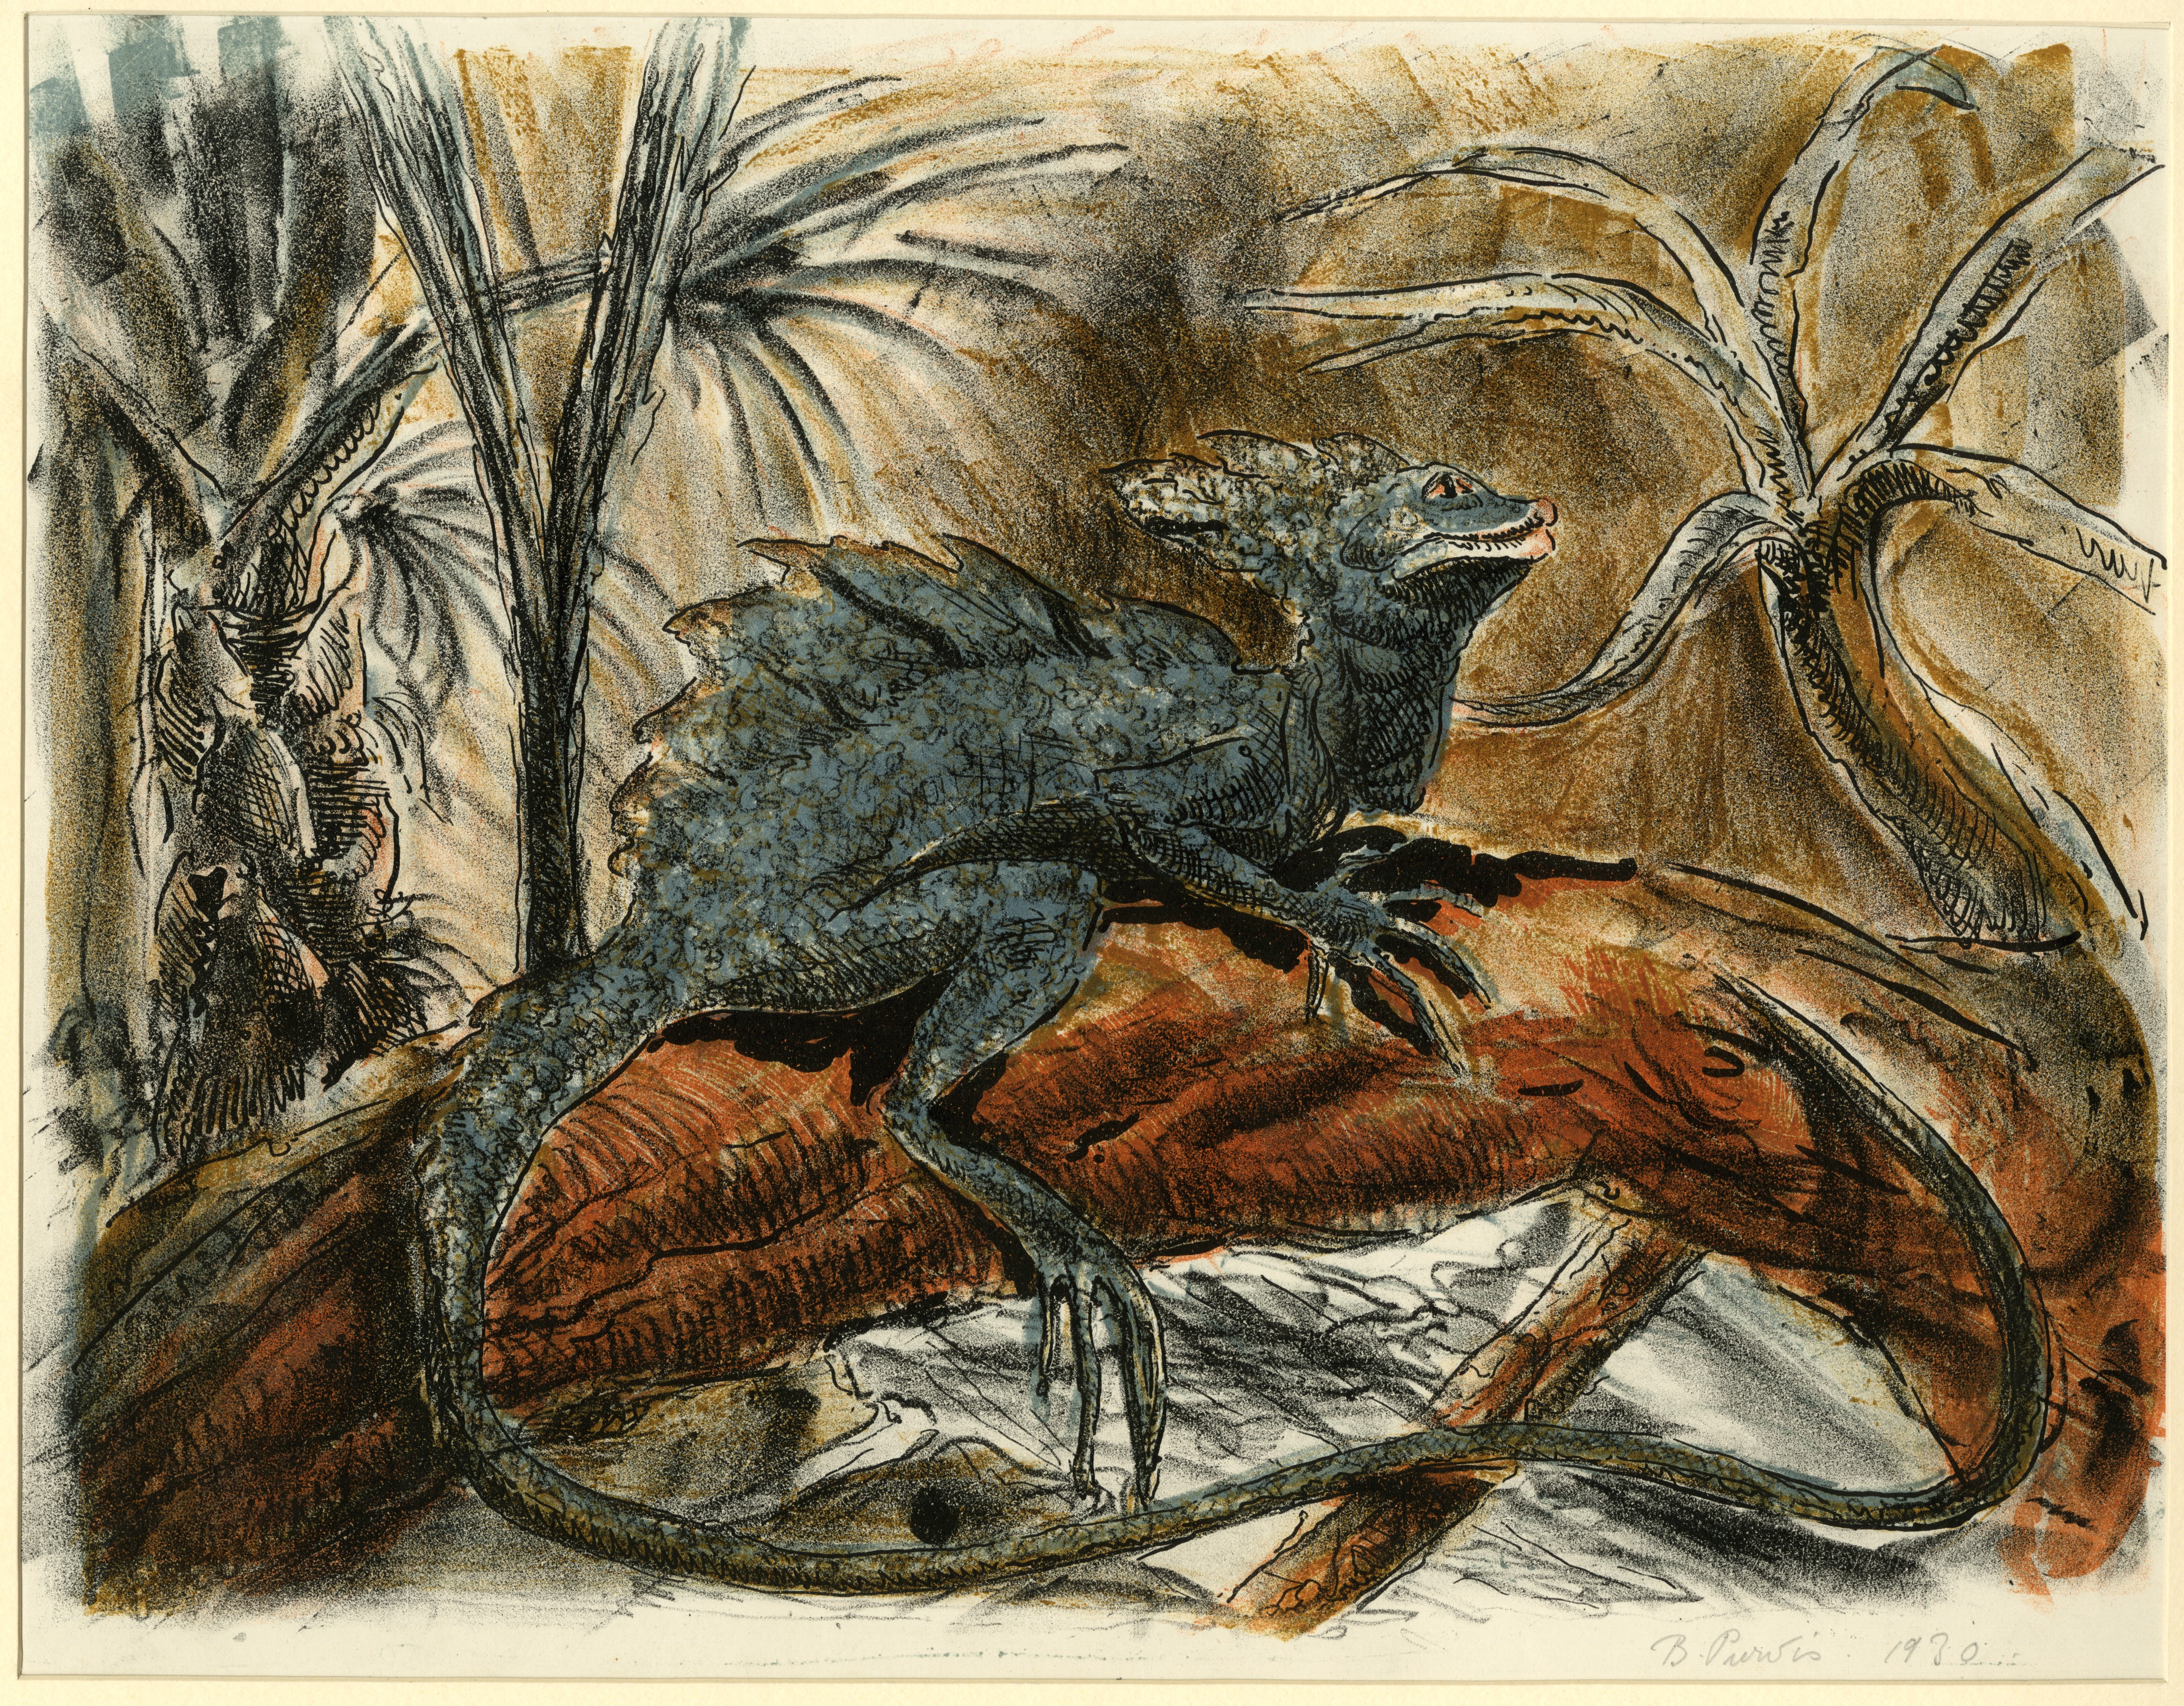 Basilicus Plumifrons (Crested reptile) (1930)